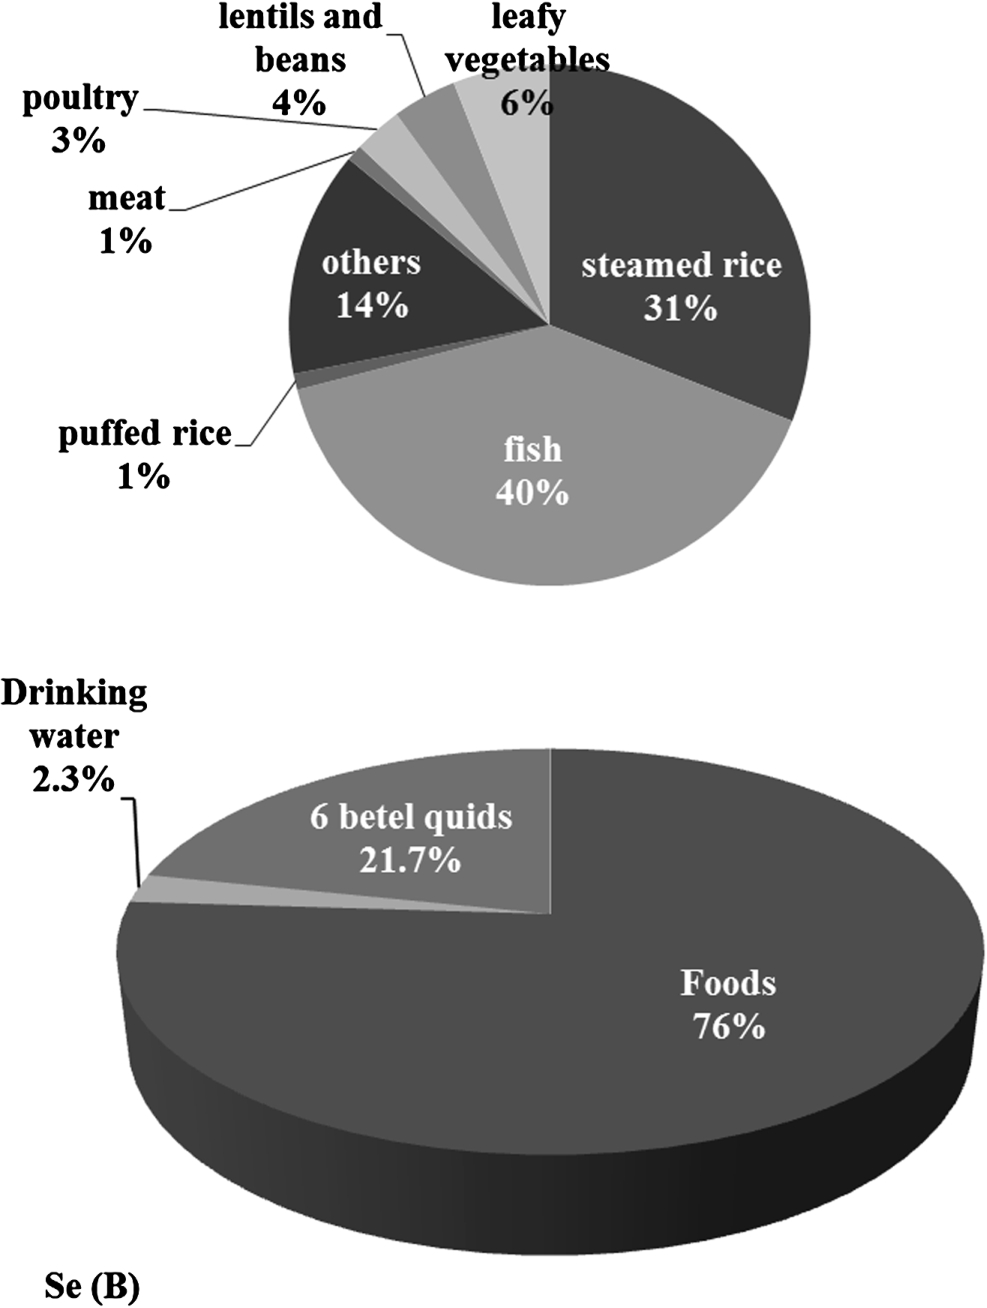 Daily intake of Se in Bangladeshi foods including betel quids. (A) Daily Se intake (%) through different Bangladeshi foodstuffs (100% = 87.7 µg Se per day), (B) Total Daily Se intake (%) for all Bangladeshi foods and non-foods, considered in the current study, including water (100% = 115.4 µg Se per day). Six betel quids were included based on the questionnaire findings regarding daily consumption by Bangladeshis [8].